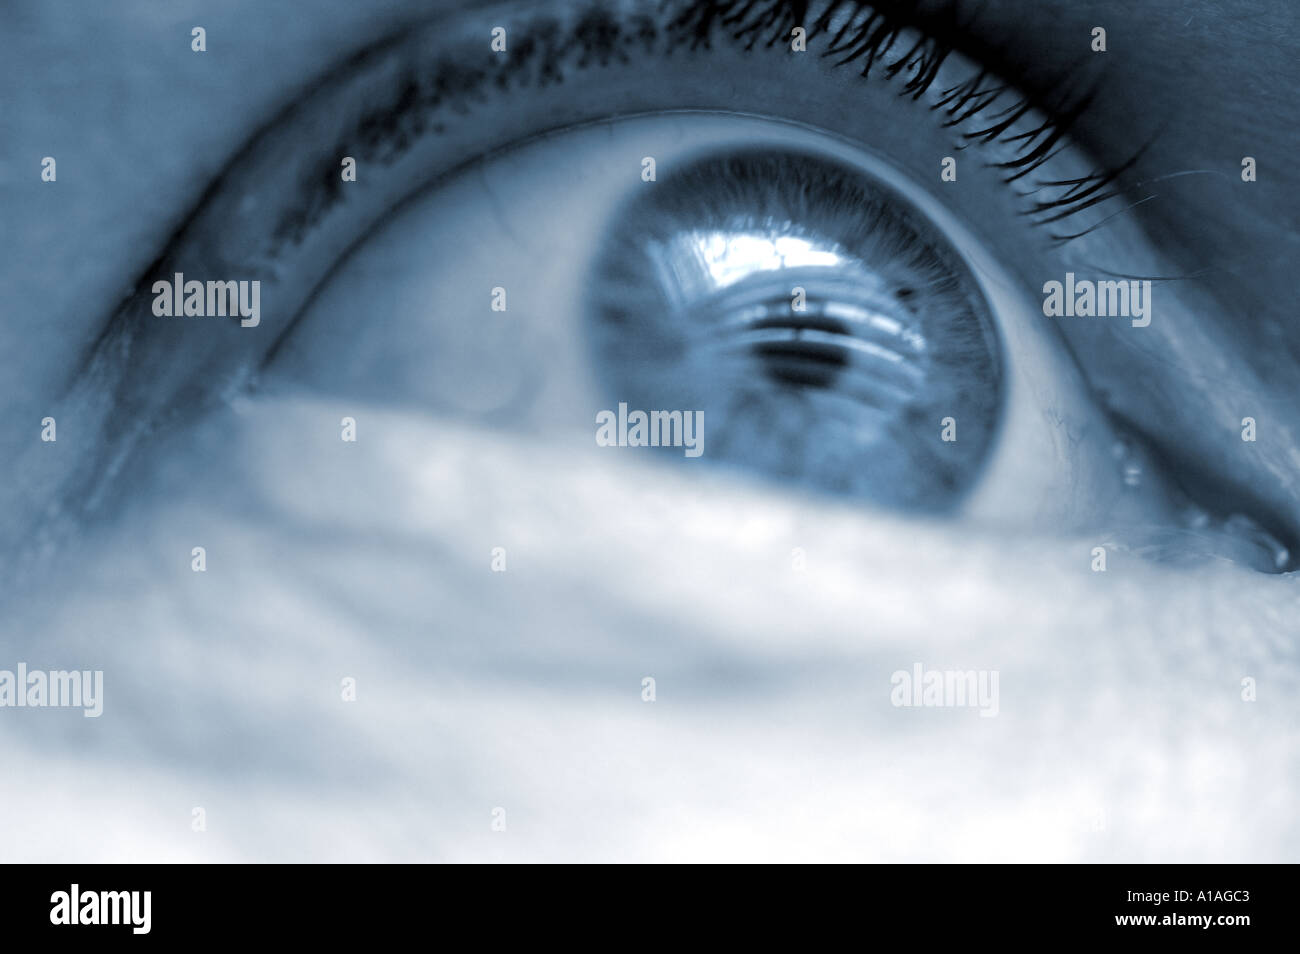 An eye looking out 'business concept' Eyes 'Looking Ahead' Stock Photo